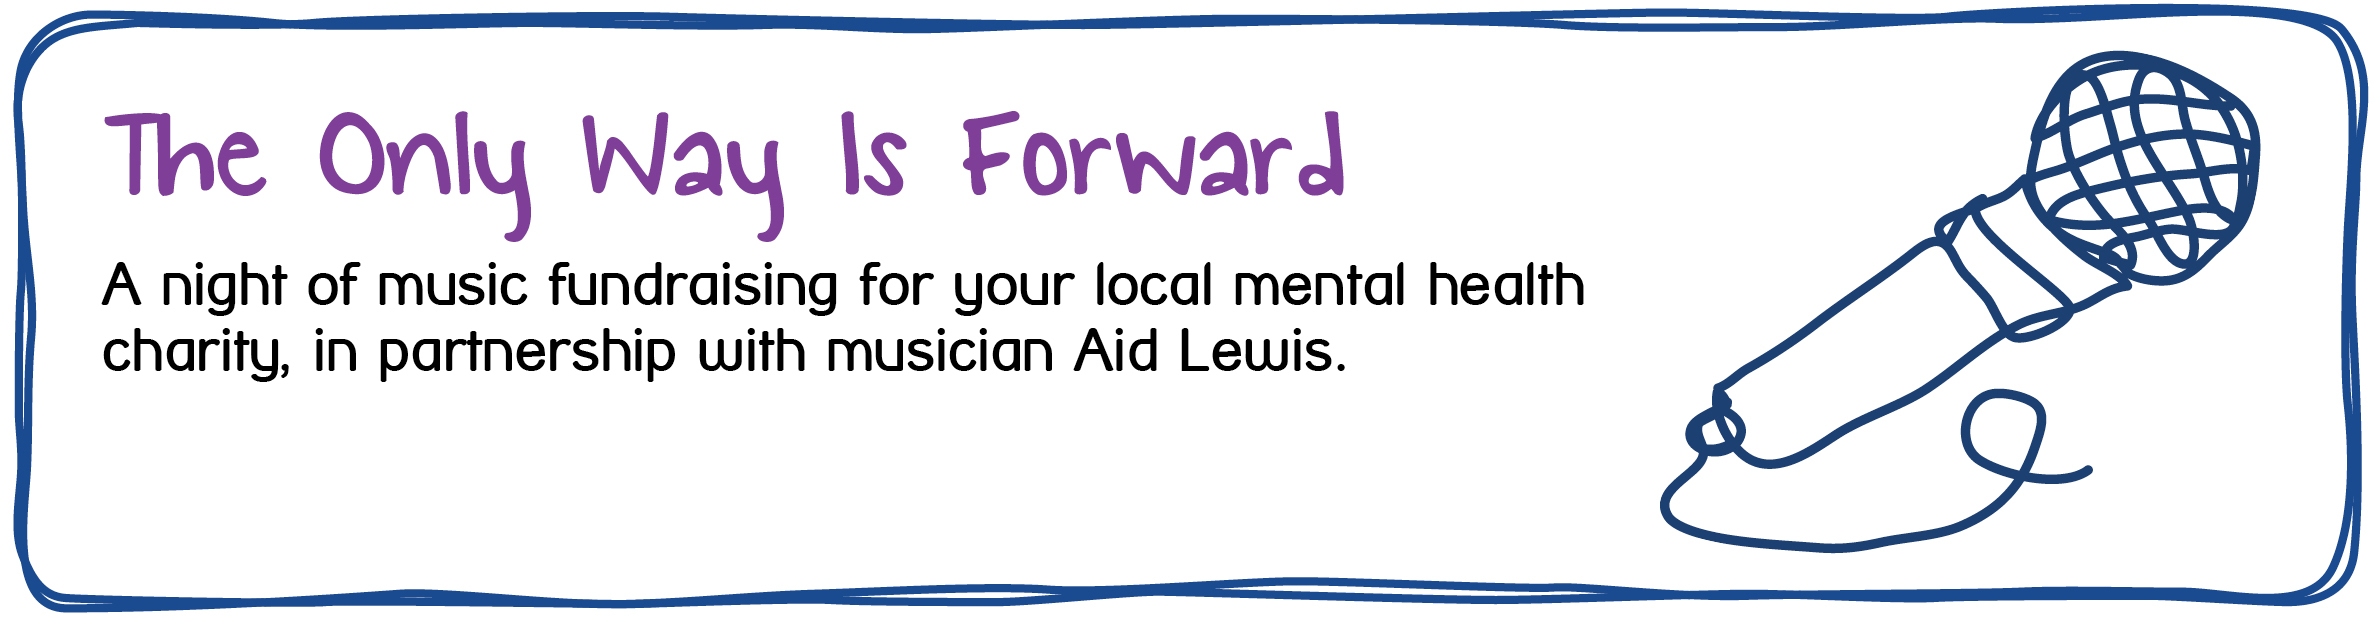 The Only Way Is Forward - A night of music fundraising for your local mental health charity, in partnership with musician Aid Lewis.